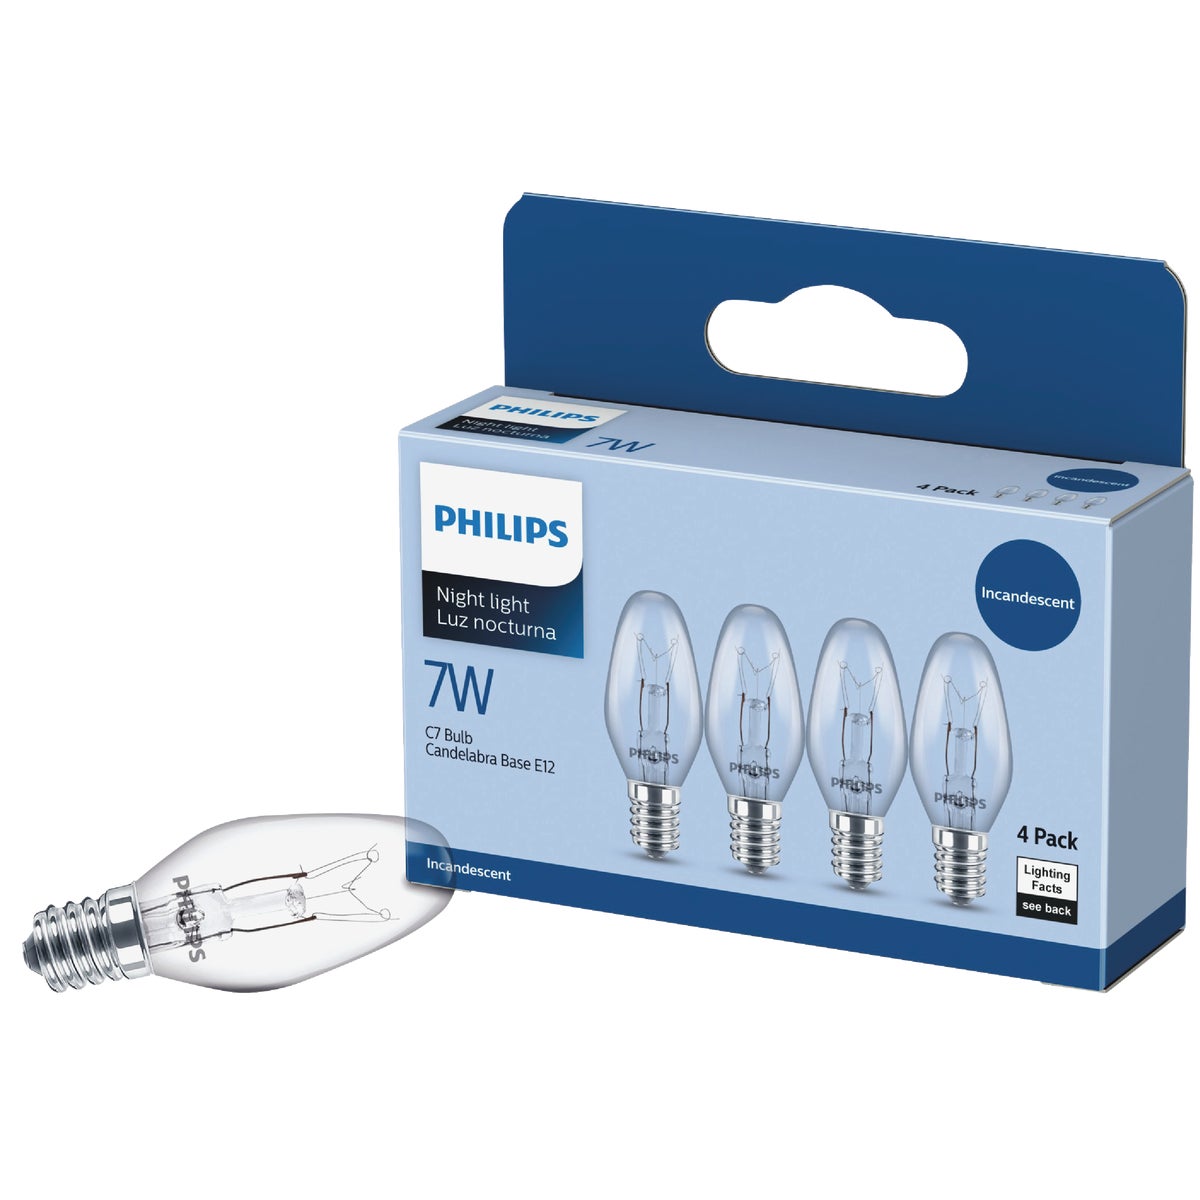 Philips 7W Clear Candelabra C7 Incandescent Night Light Bulb (4-Pack)